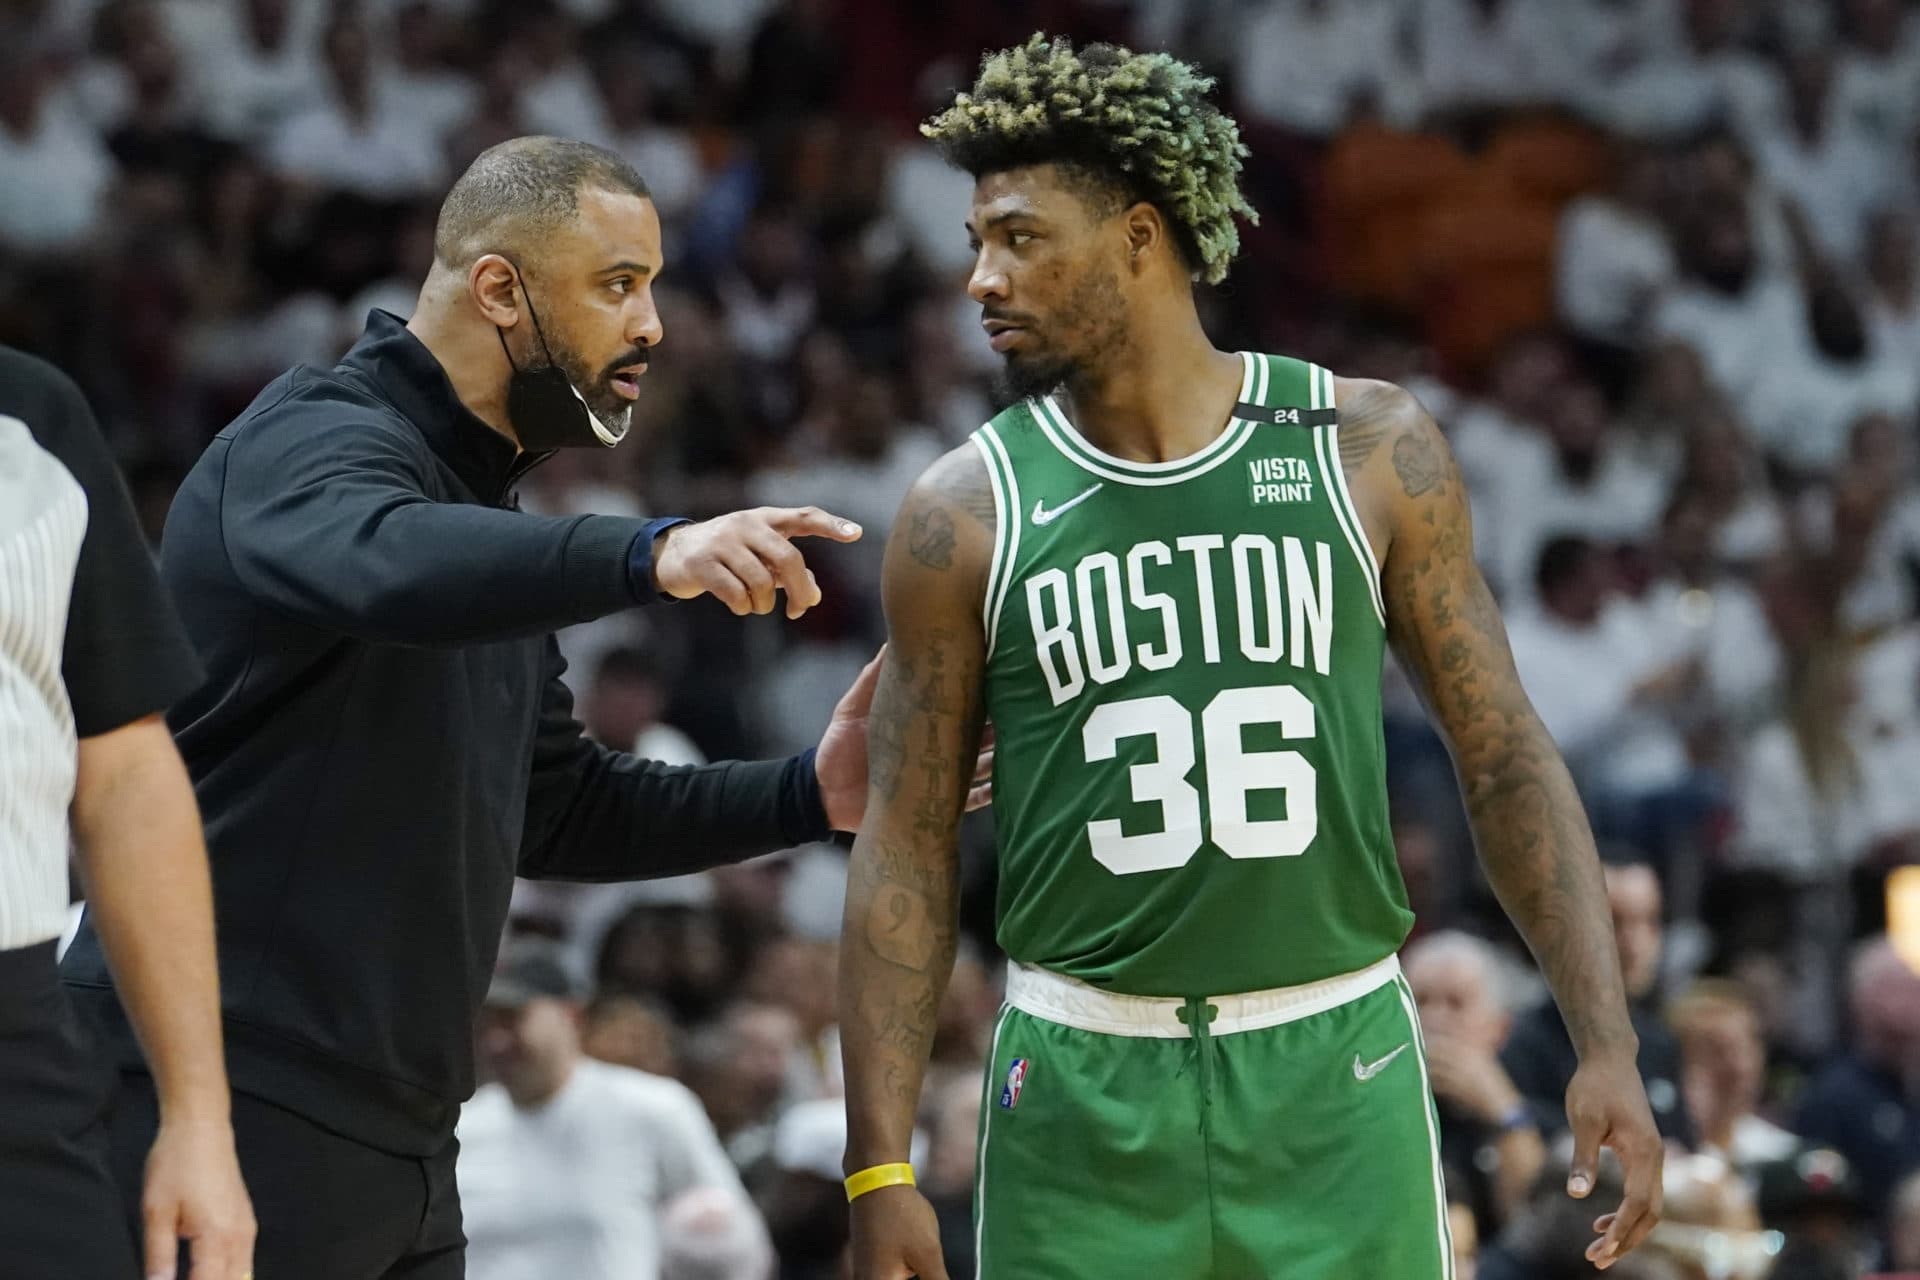 Boston Celtics head coach Ime Udoka talks to guard Marcus Smart (36) during the first half of Game 7 of the NBA basketball Eastern Conference finals playoff series against the Miami Heat, Sunday, May 29, 2022, in Miami. (Lynne Sladky/AP)